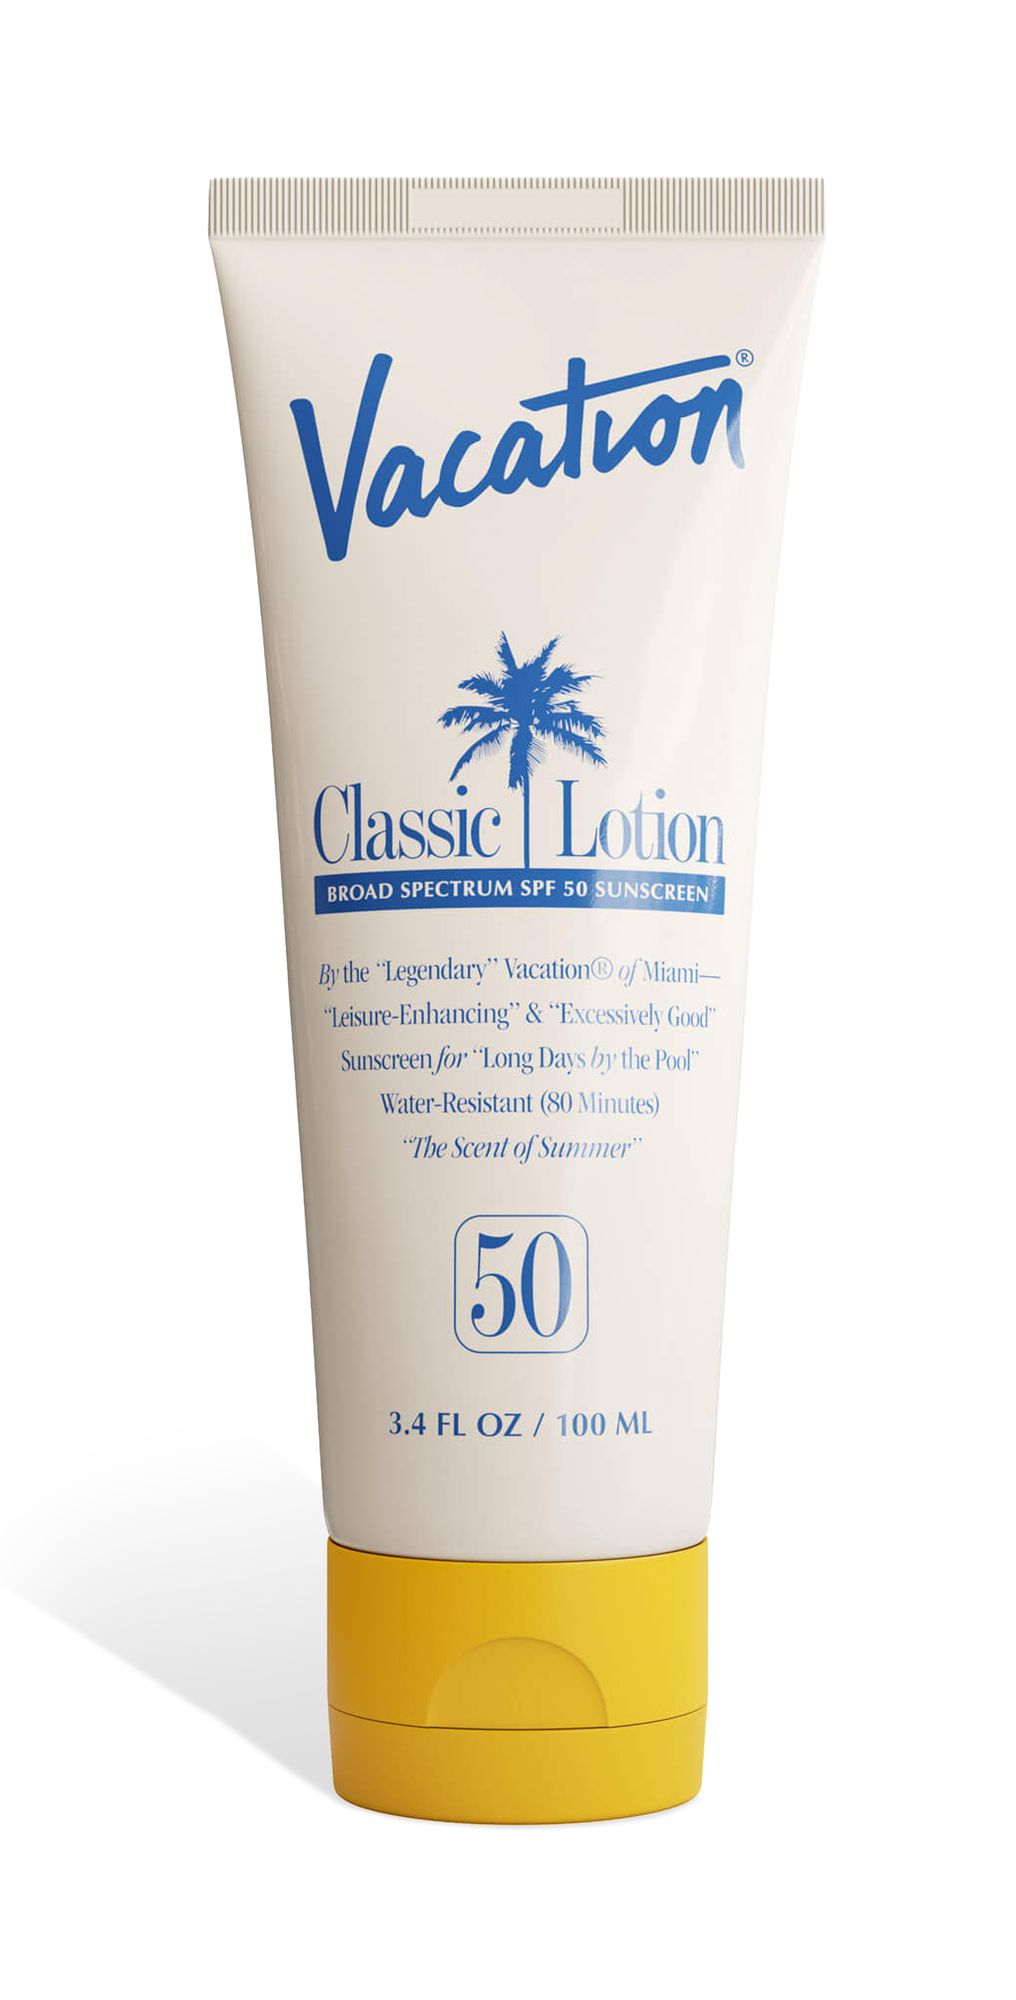 Vacation Sunscreen Classic Lotion SPF 50 | Shopbop